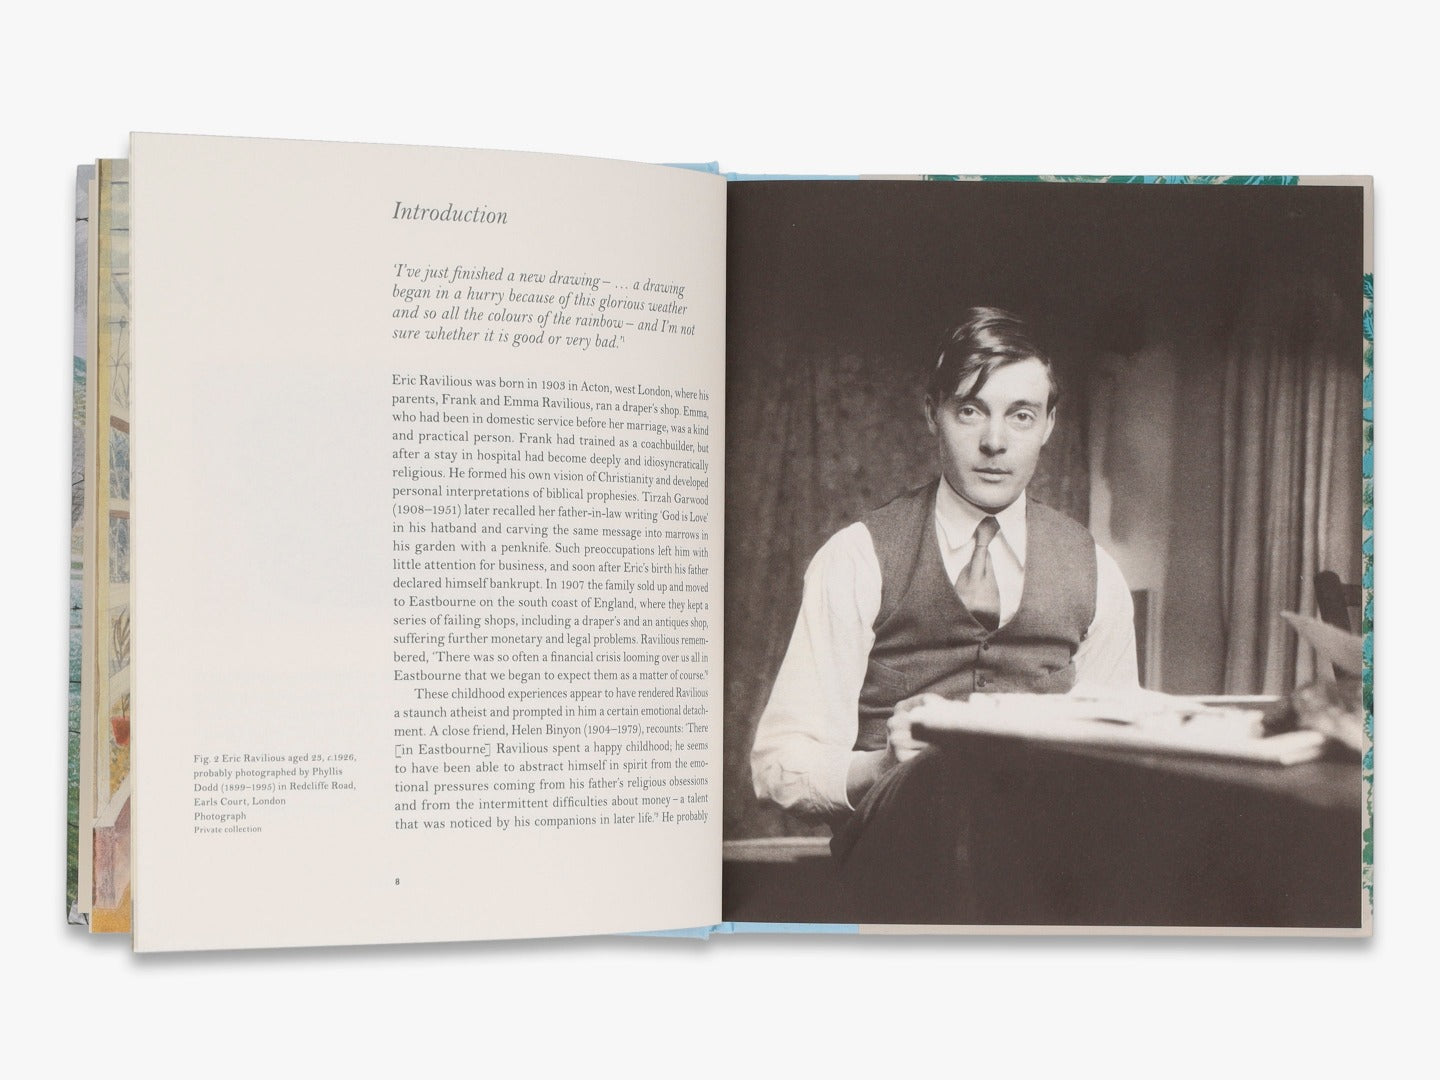 Introduction page of 'Eric Ravilious: Landscapes & Nature' with text and photograph of Ravilious